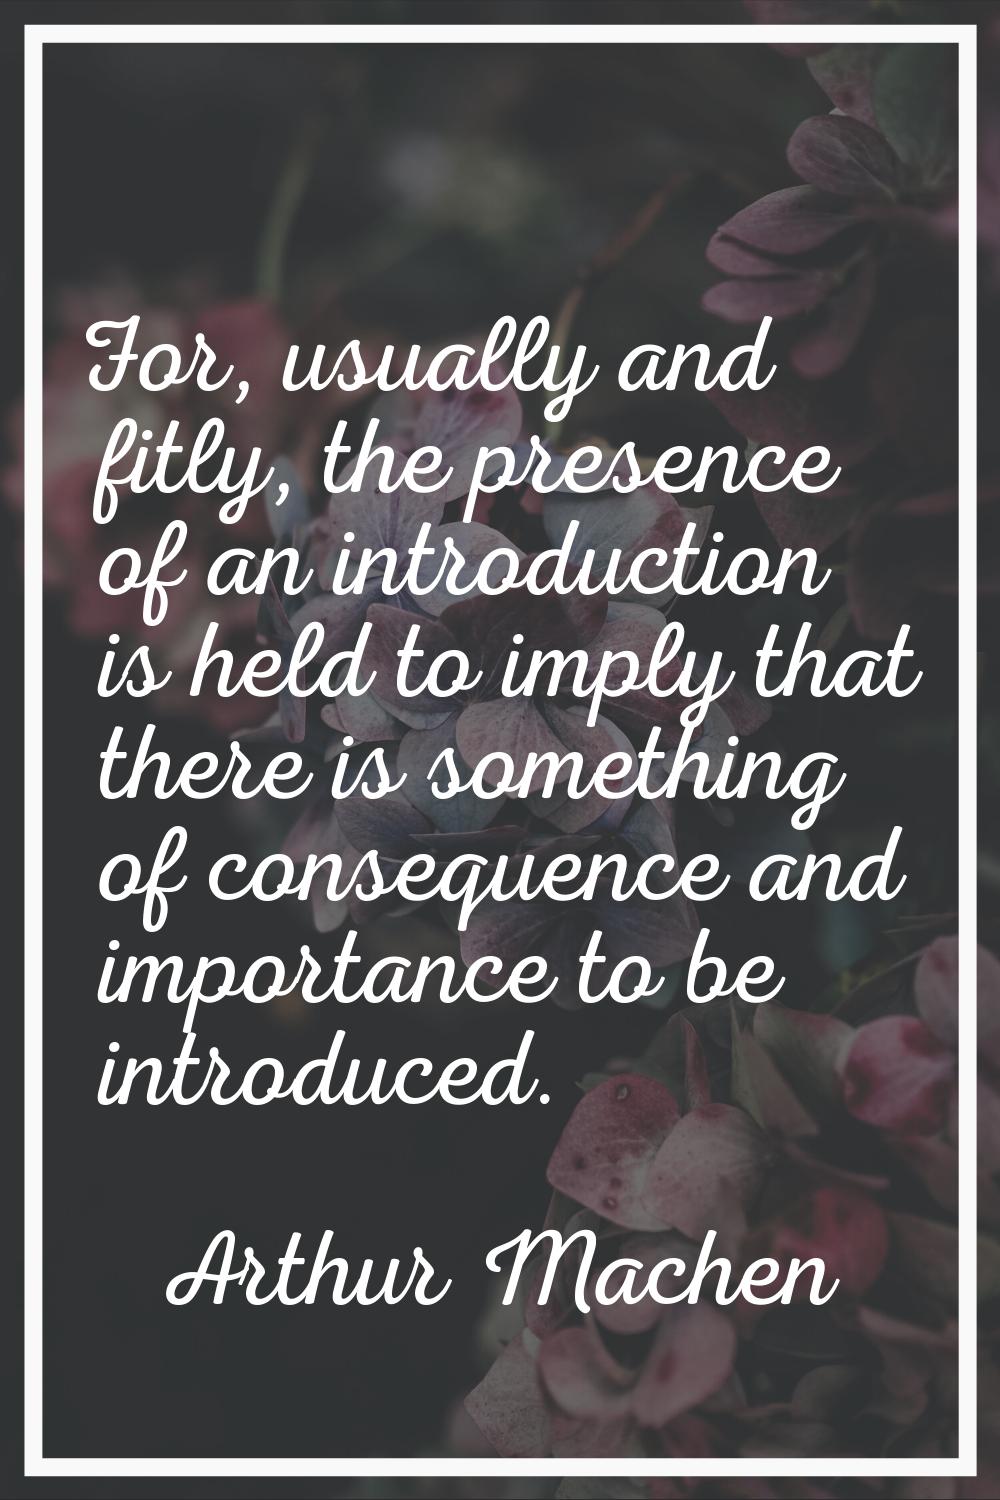 For, usually and fitly, the presence of an introduction is held to imply that there is something of